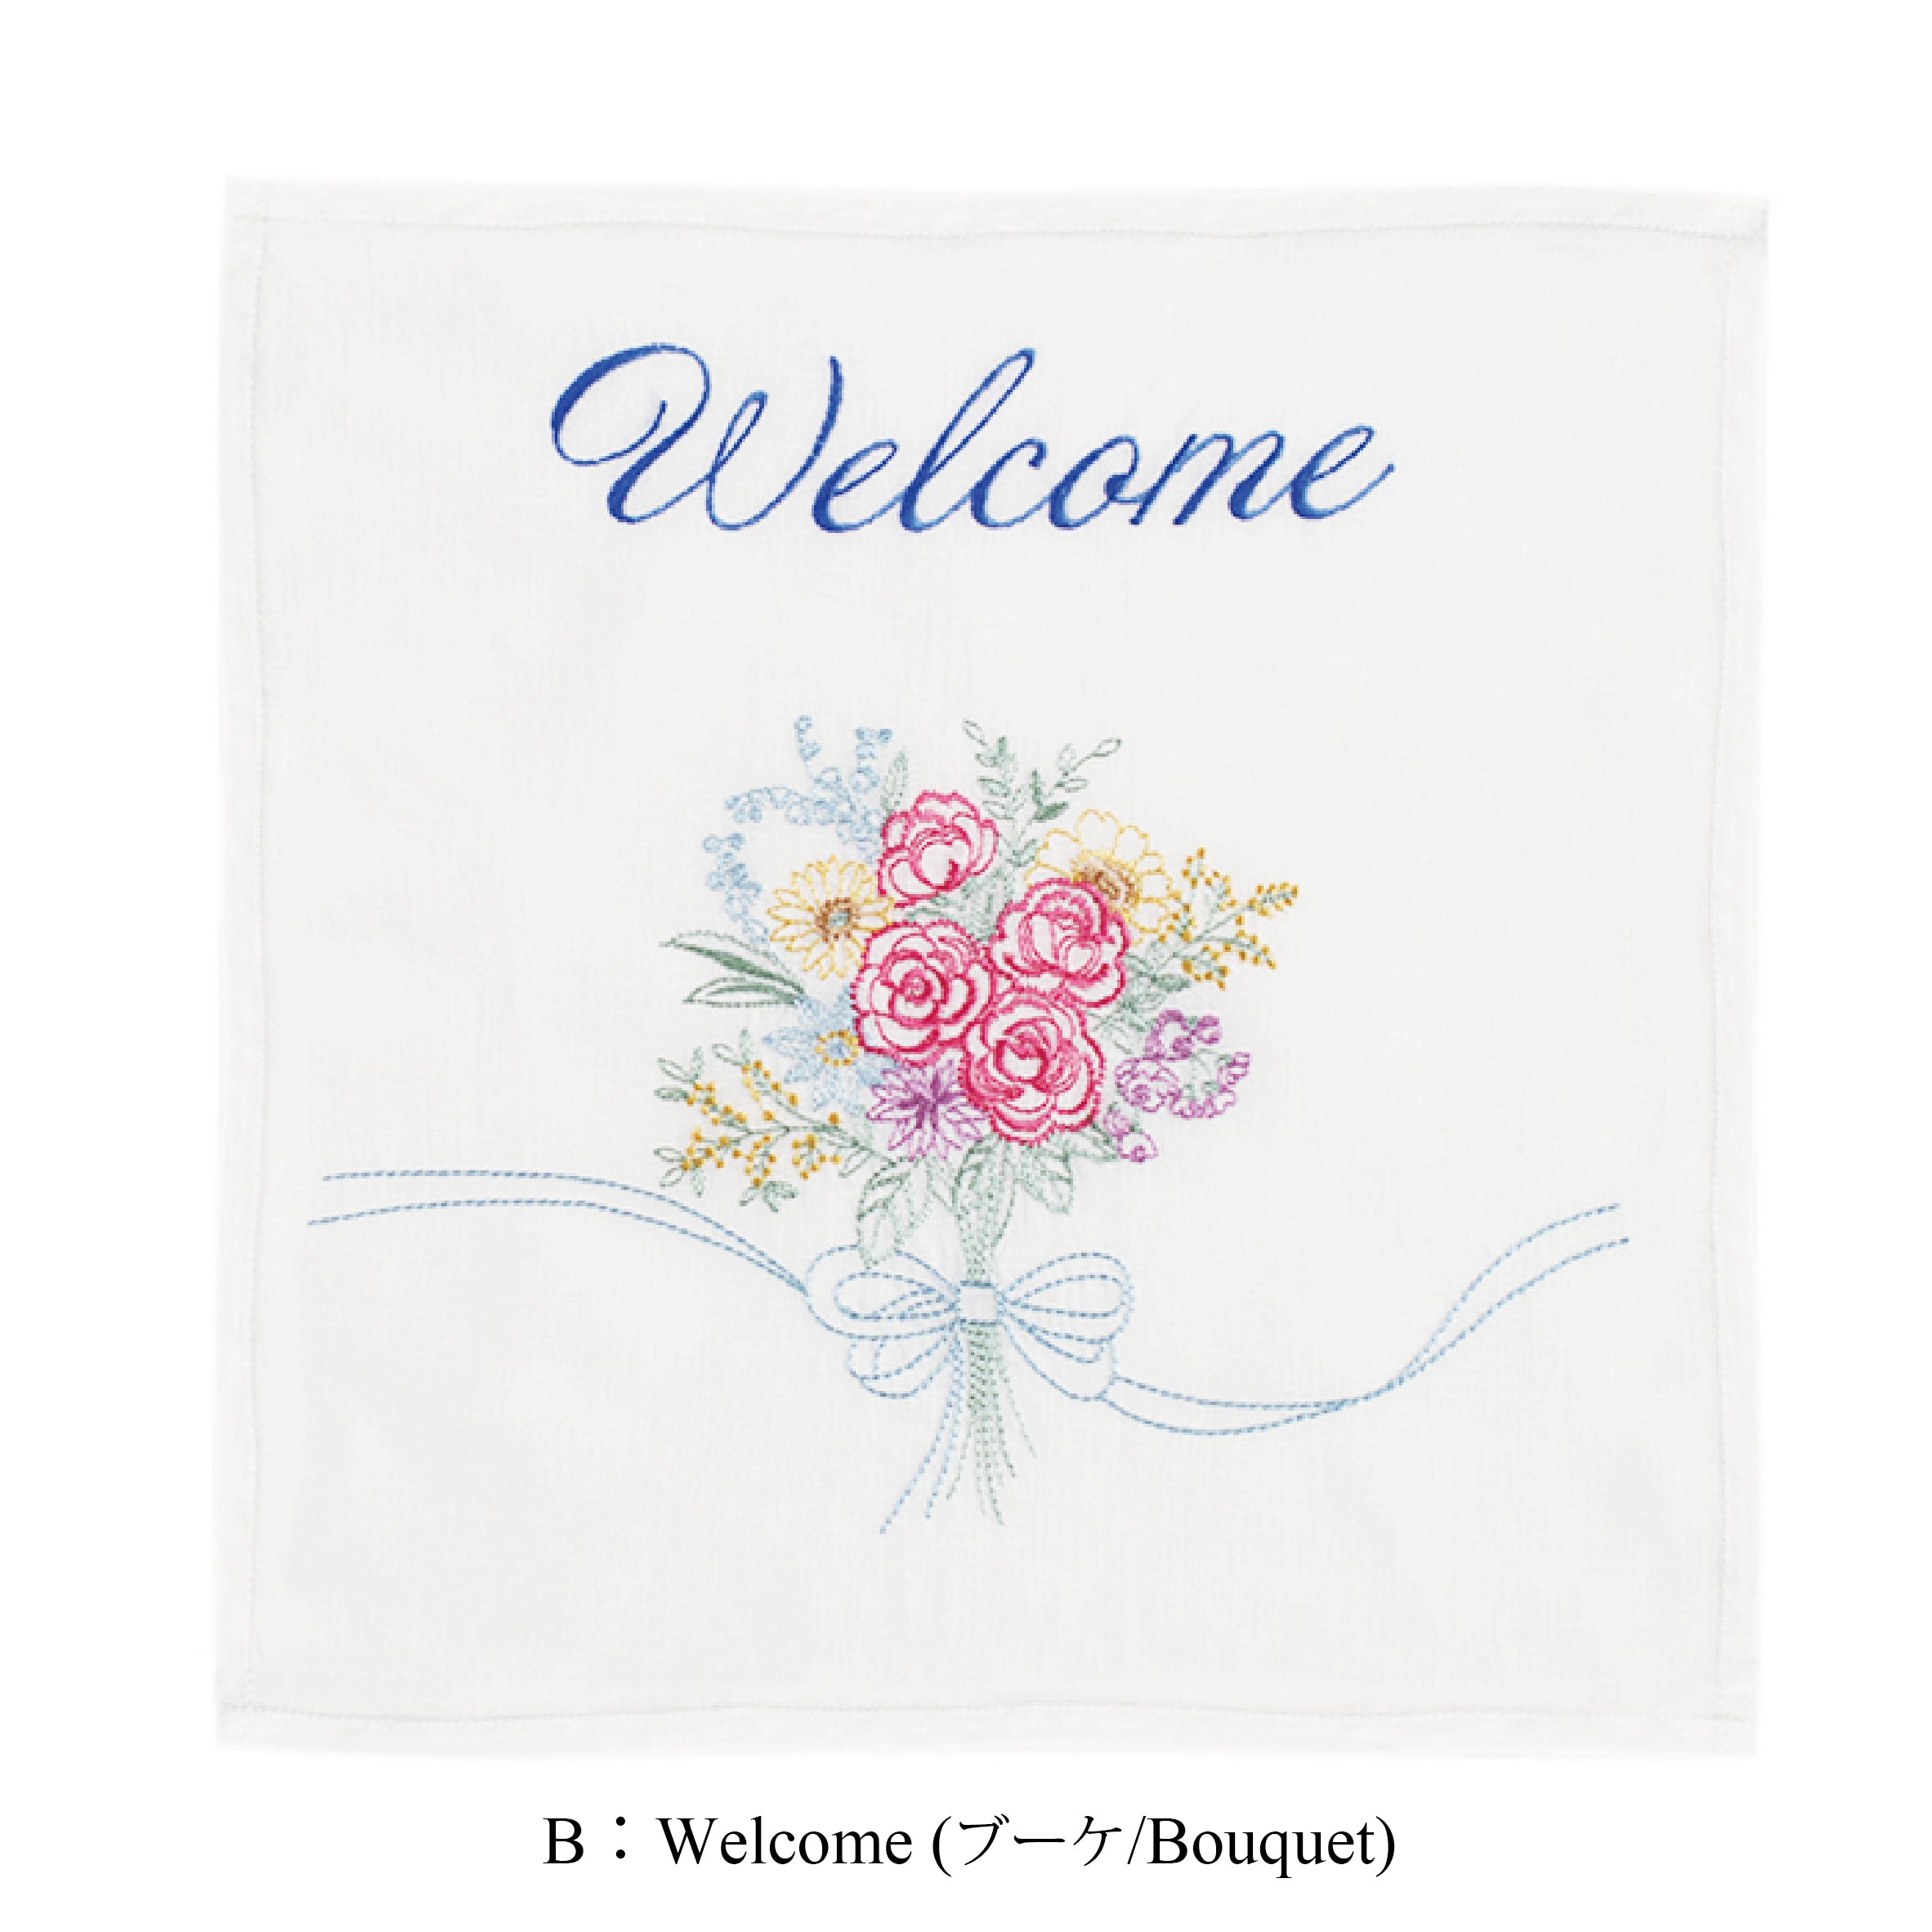 welcome board (e.g. placed outside wedding reception to greet guests, and confirm location)